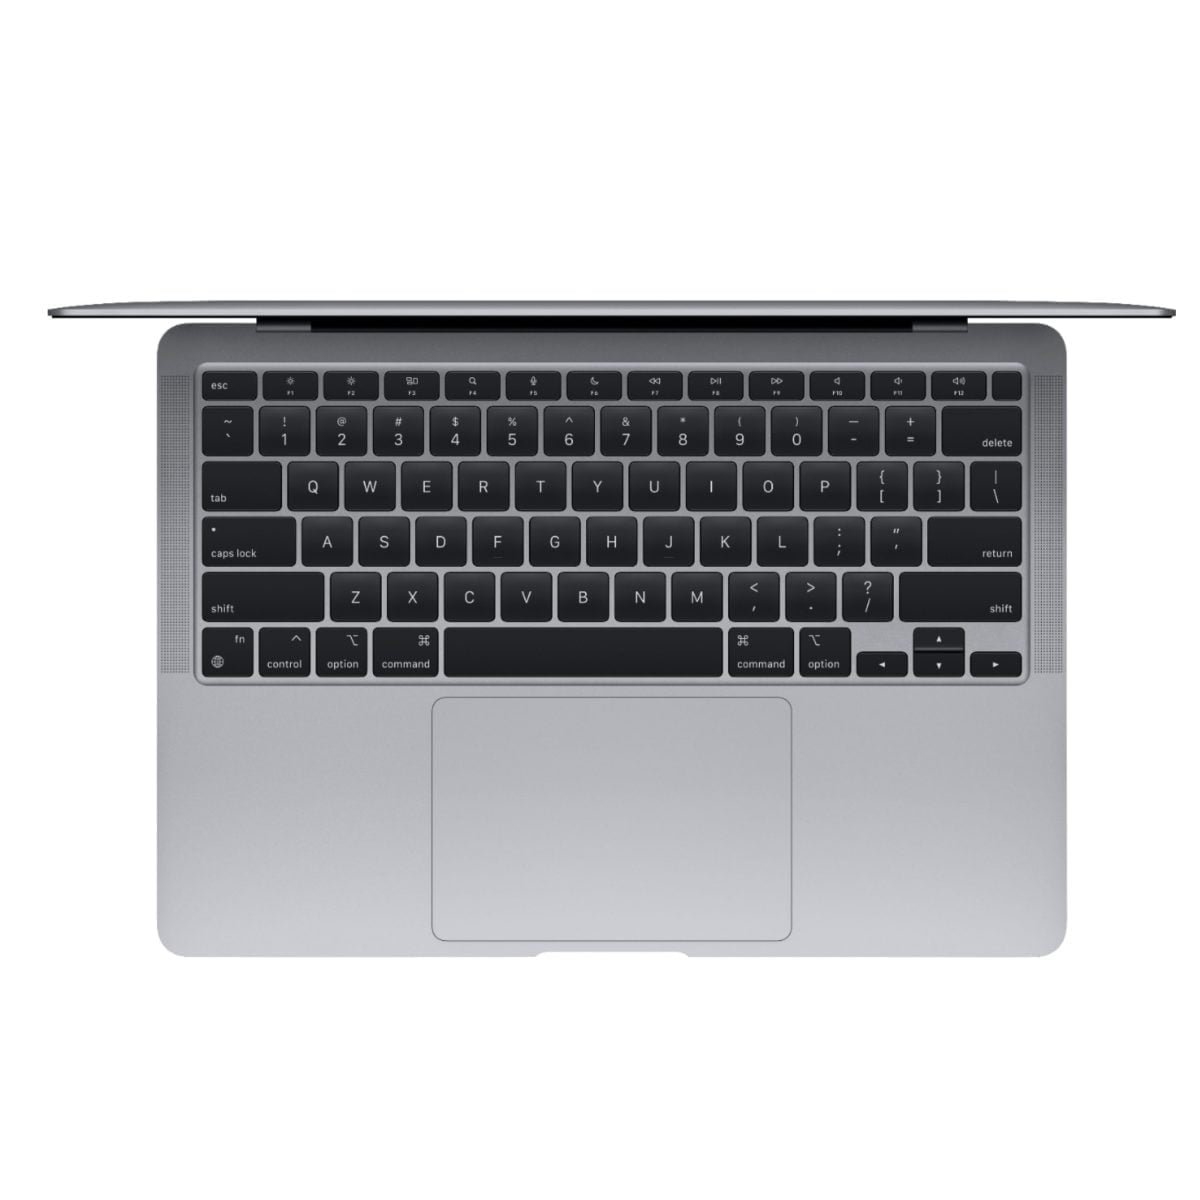 5721600Cv11D Scaled Apple &Lt;H1 Class=&Quot;Heading-5 V-Fw-Regular&Quot;&Gt;Macbook Air 13&Quot; Laptop - Apple M1 Chip - 8Gb Memory - 512Gb Ssd (Latest Model) - Space Gray (English Keyboard)&Lt;/H1&Gt; Https://Www.youtube.com/Watch?V=Hs1Hols4Sd0 &Lt;Span Class=&Quot;Product-Data-Label Body-Copy&Quot;&Gt;&Lt;Strong&Gt;Model&Lt;/Strong&Gt;:&Lt;/Span&Gt;&Lt;Span Class=&Quot;Product-Data-Value Body-Copy&Quot;&Gt;Mgn73, &Lt;/Span&Gt;Apple Macbook Air 13  Thinnest And Lightest Notebook Gets Supercharged With The Apple M1 Chip. Tackle Your Projects With The Blazing-Fast 8-Core Cpu. Take Graphics-Intensive Apps And Games To The Next Level With The 8-Core Gpu. And Accelerate Machine Learning Tasks With The 16-Core Neural Engine. All With A Silent, Fanless Design And The Longest Battery Life Ever — Up To 18 Hours.¹ Macbook Air. Still Perfectly Portable. Just A Lot More Powerful. Macbook Air Macbook Air 13&Quot; Laptop - Apple M1 Chip - 8Gb Memory - 512Gb Ssd (Mgn73) - Space Gray